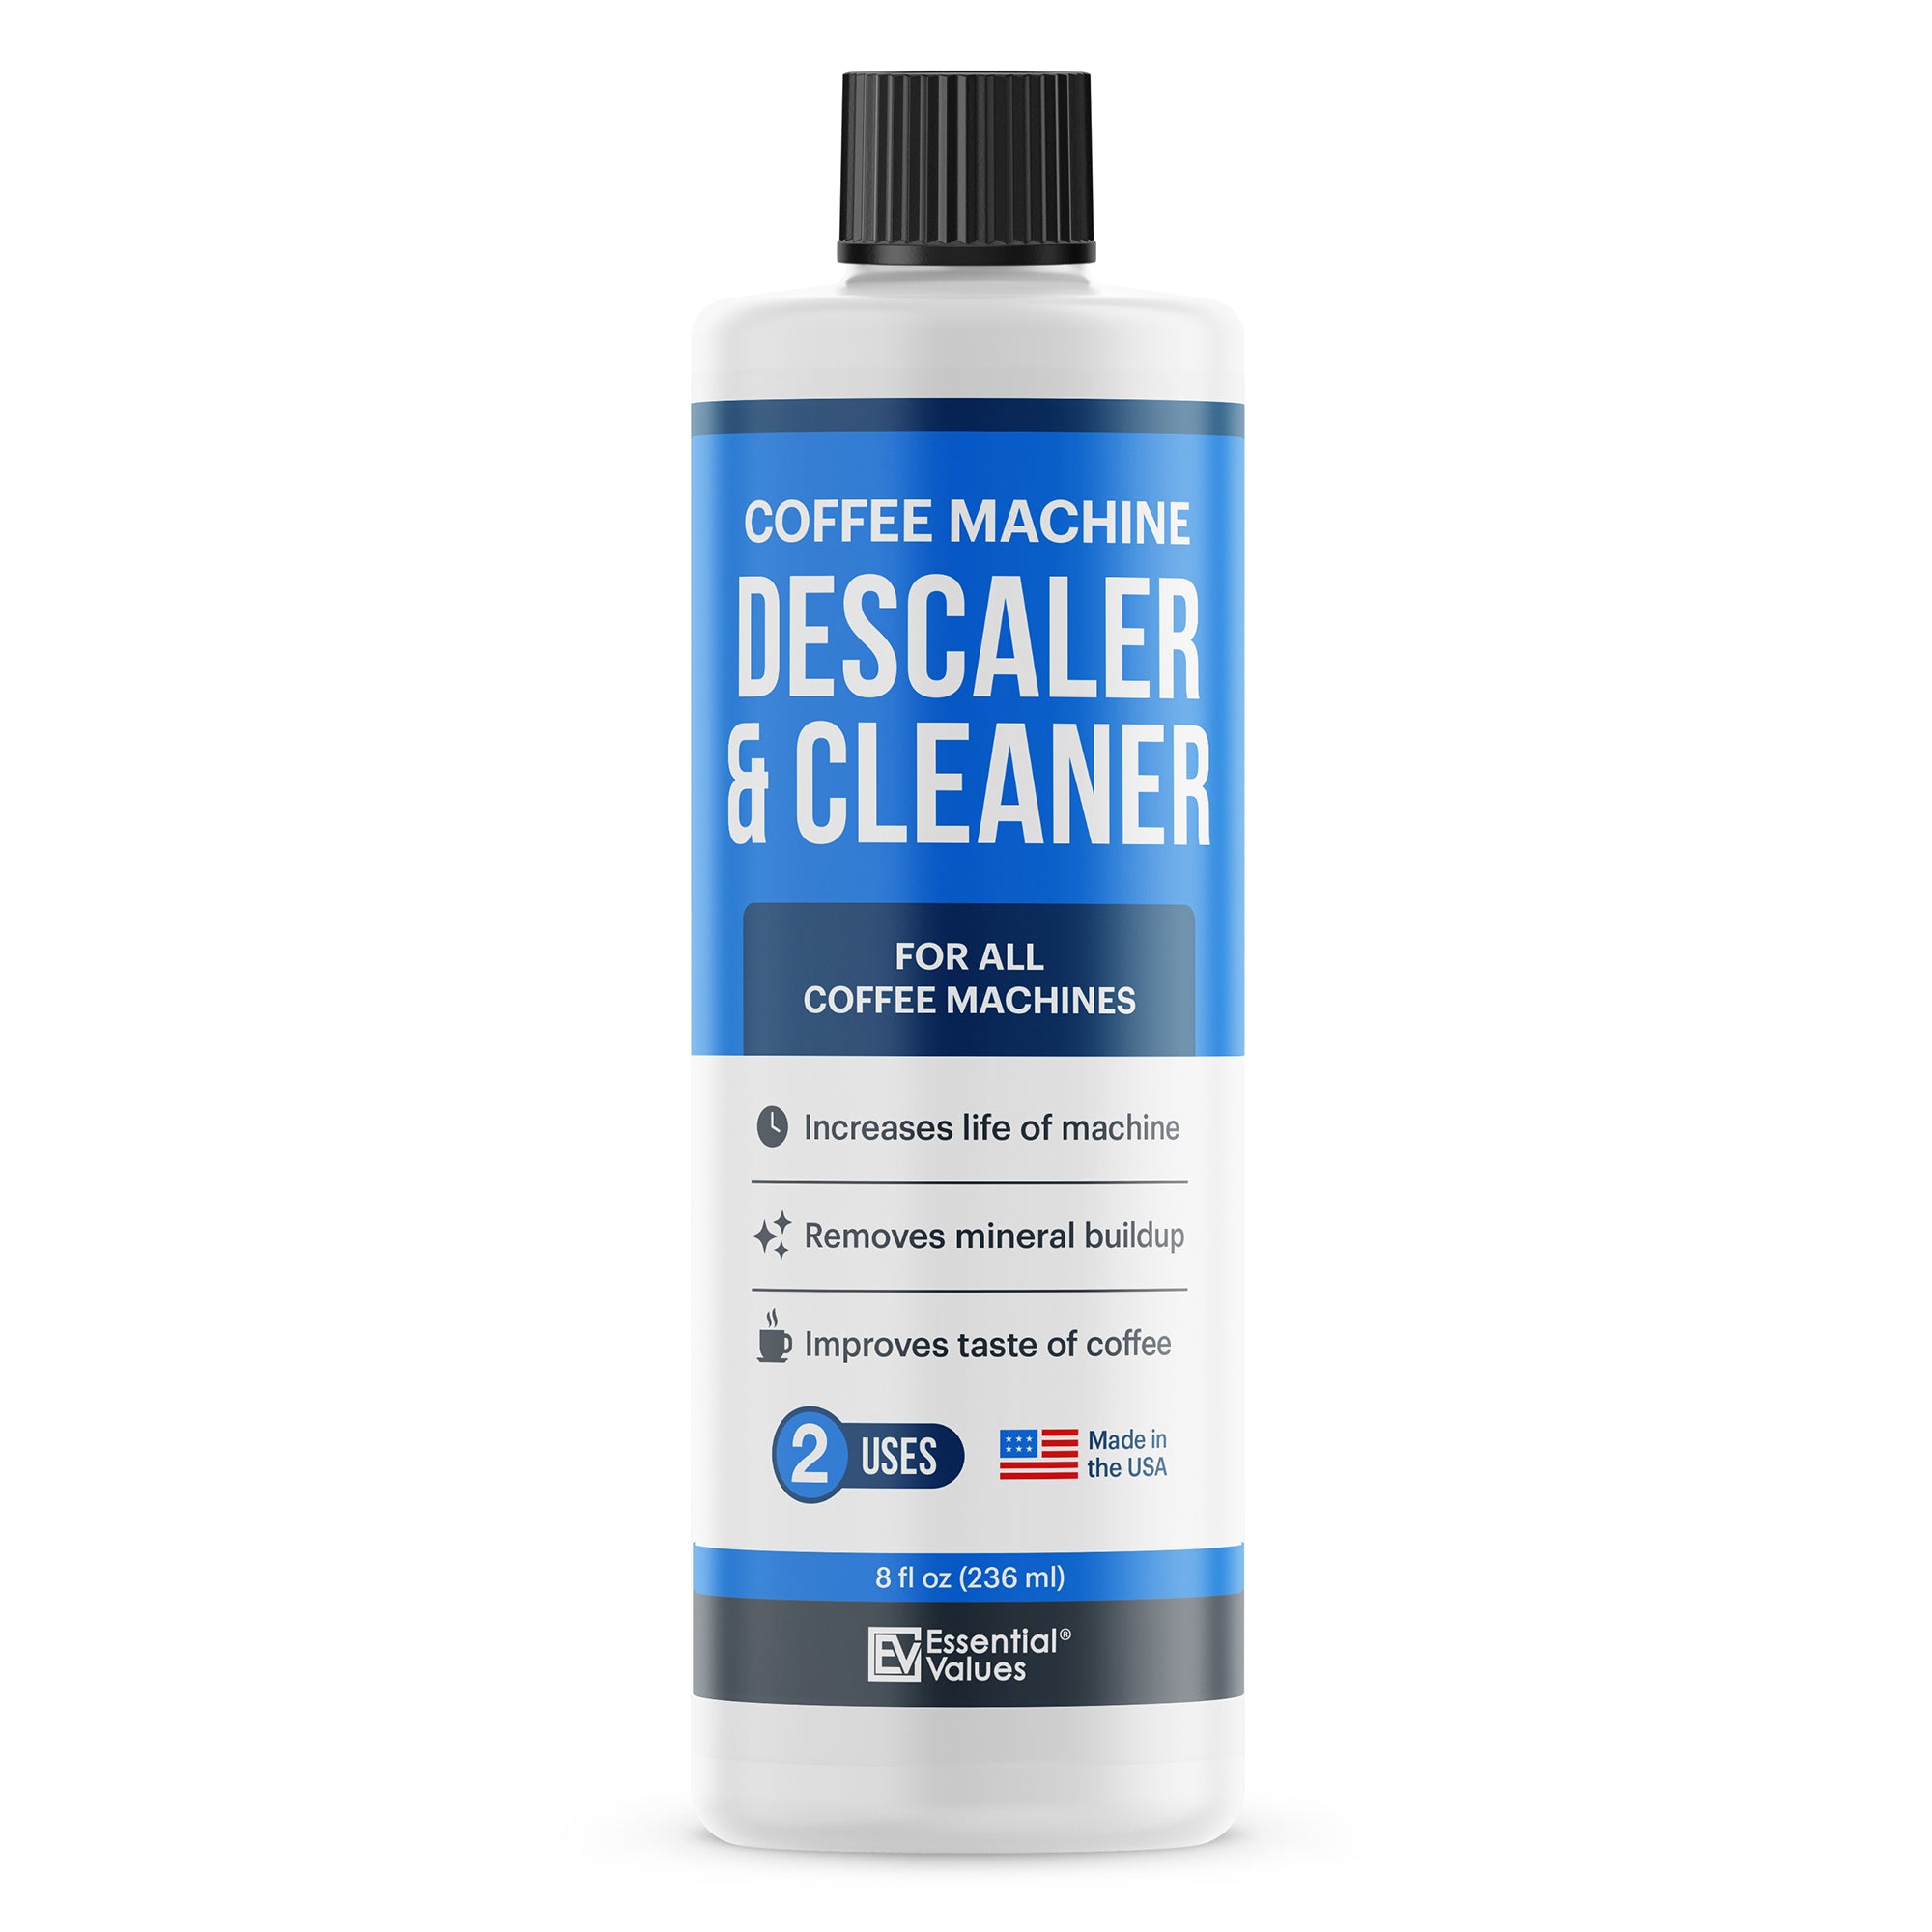 Philips Saeco Descaler & Cleaning Kit for Senseo Coffee Machines